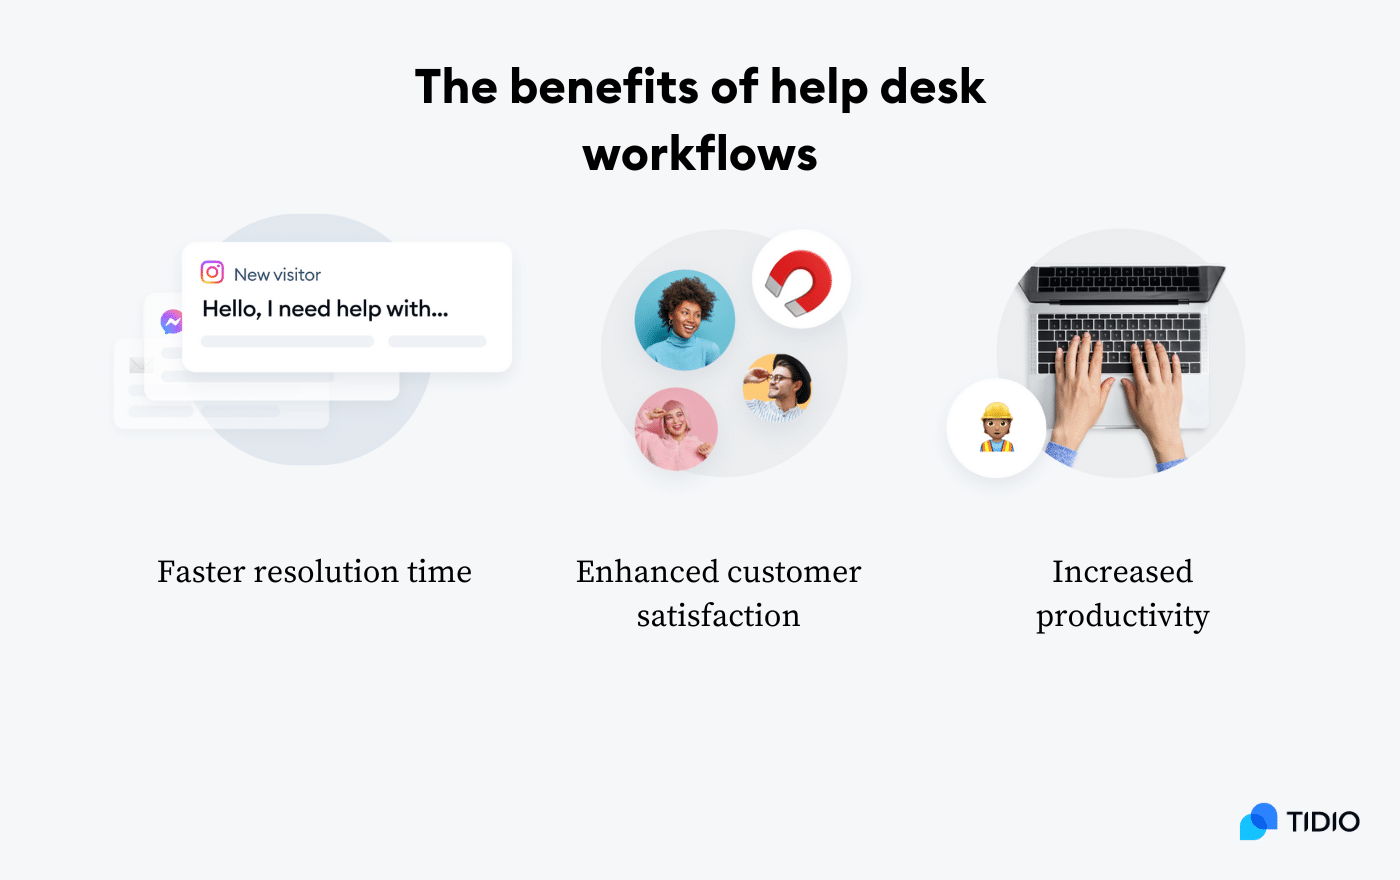 The benefits of using help desk workflows